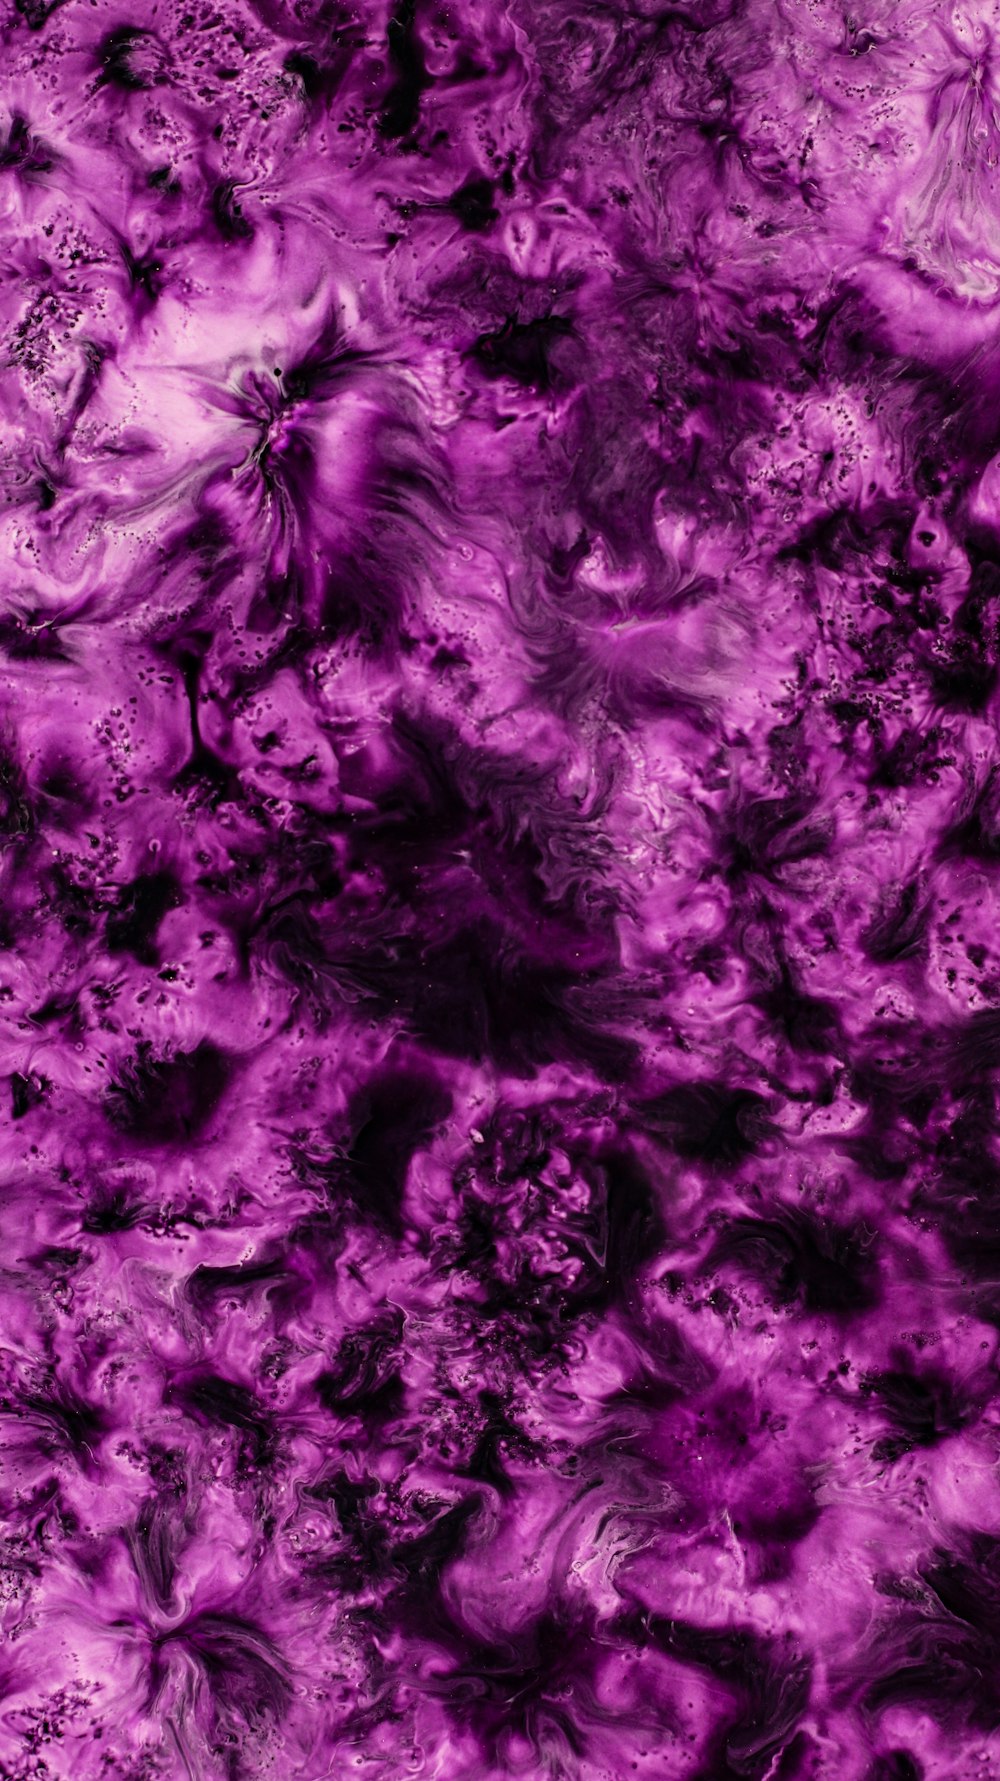 a purple background with black and white swirls